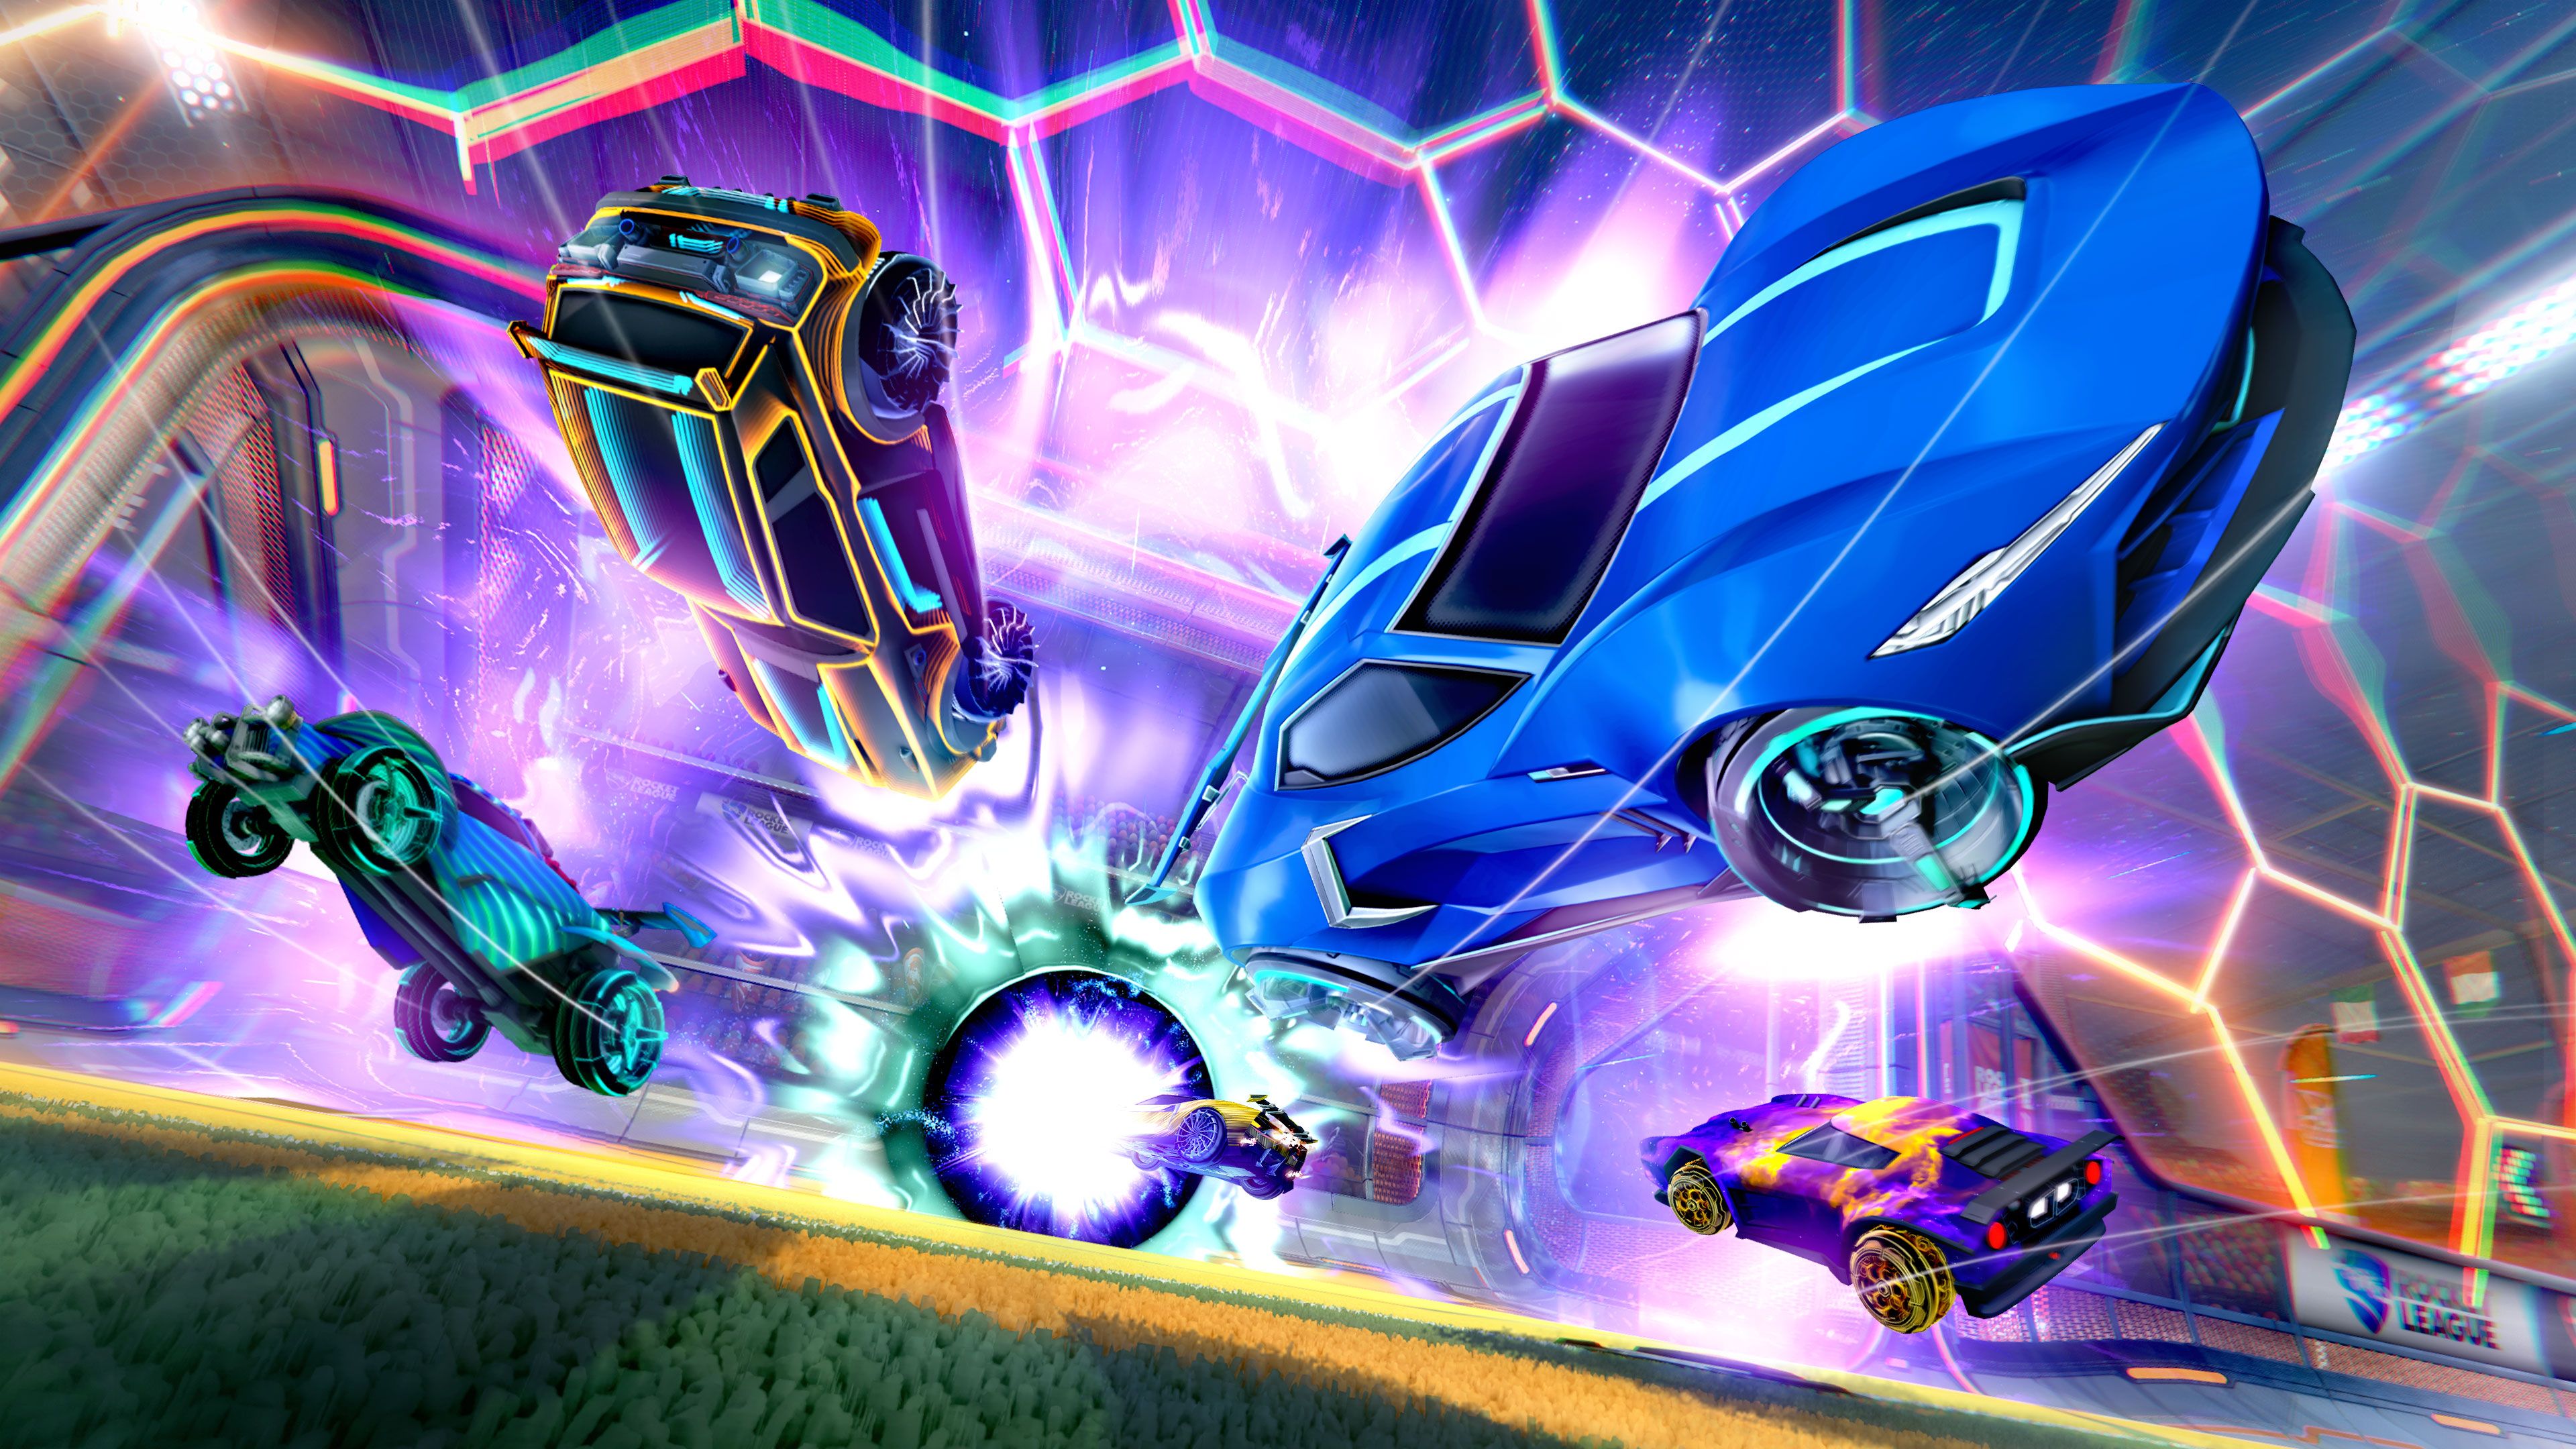 is rocket league multiplayer traing a thimg?